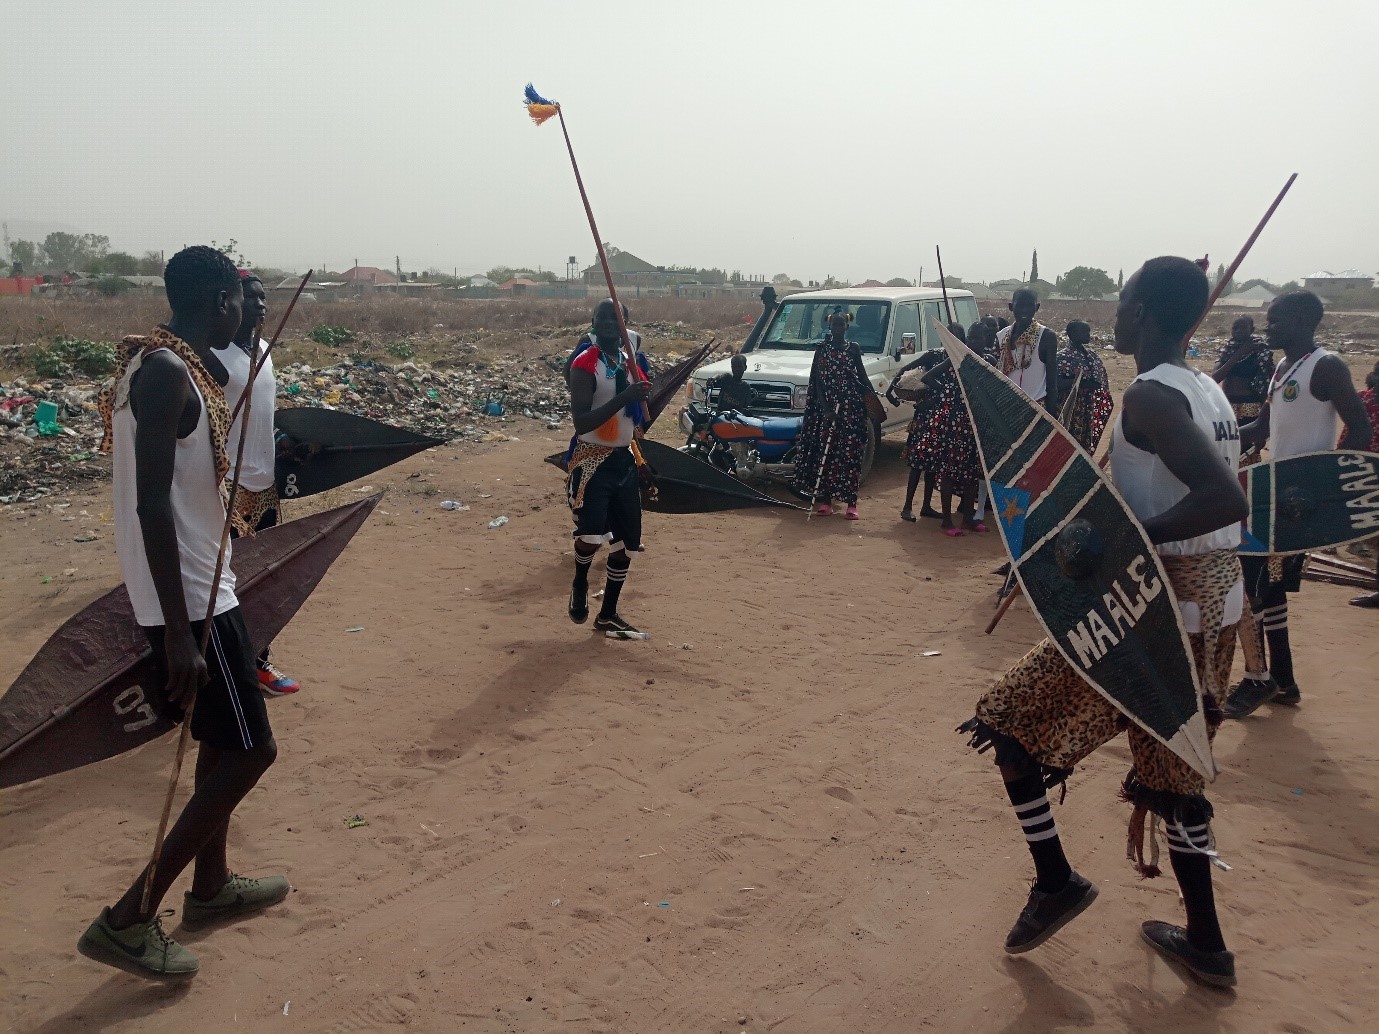 Sport for peace creates cohesion among Aweil youth